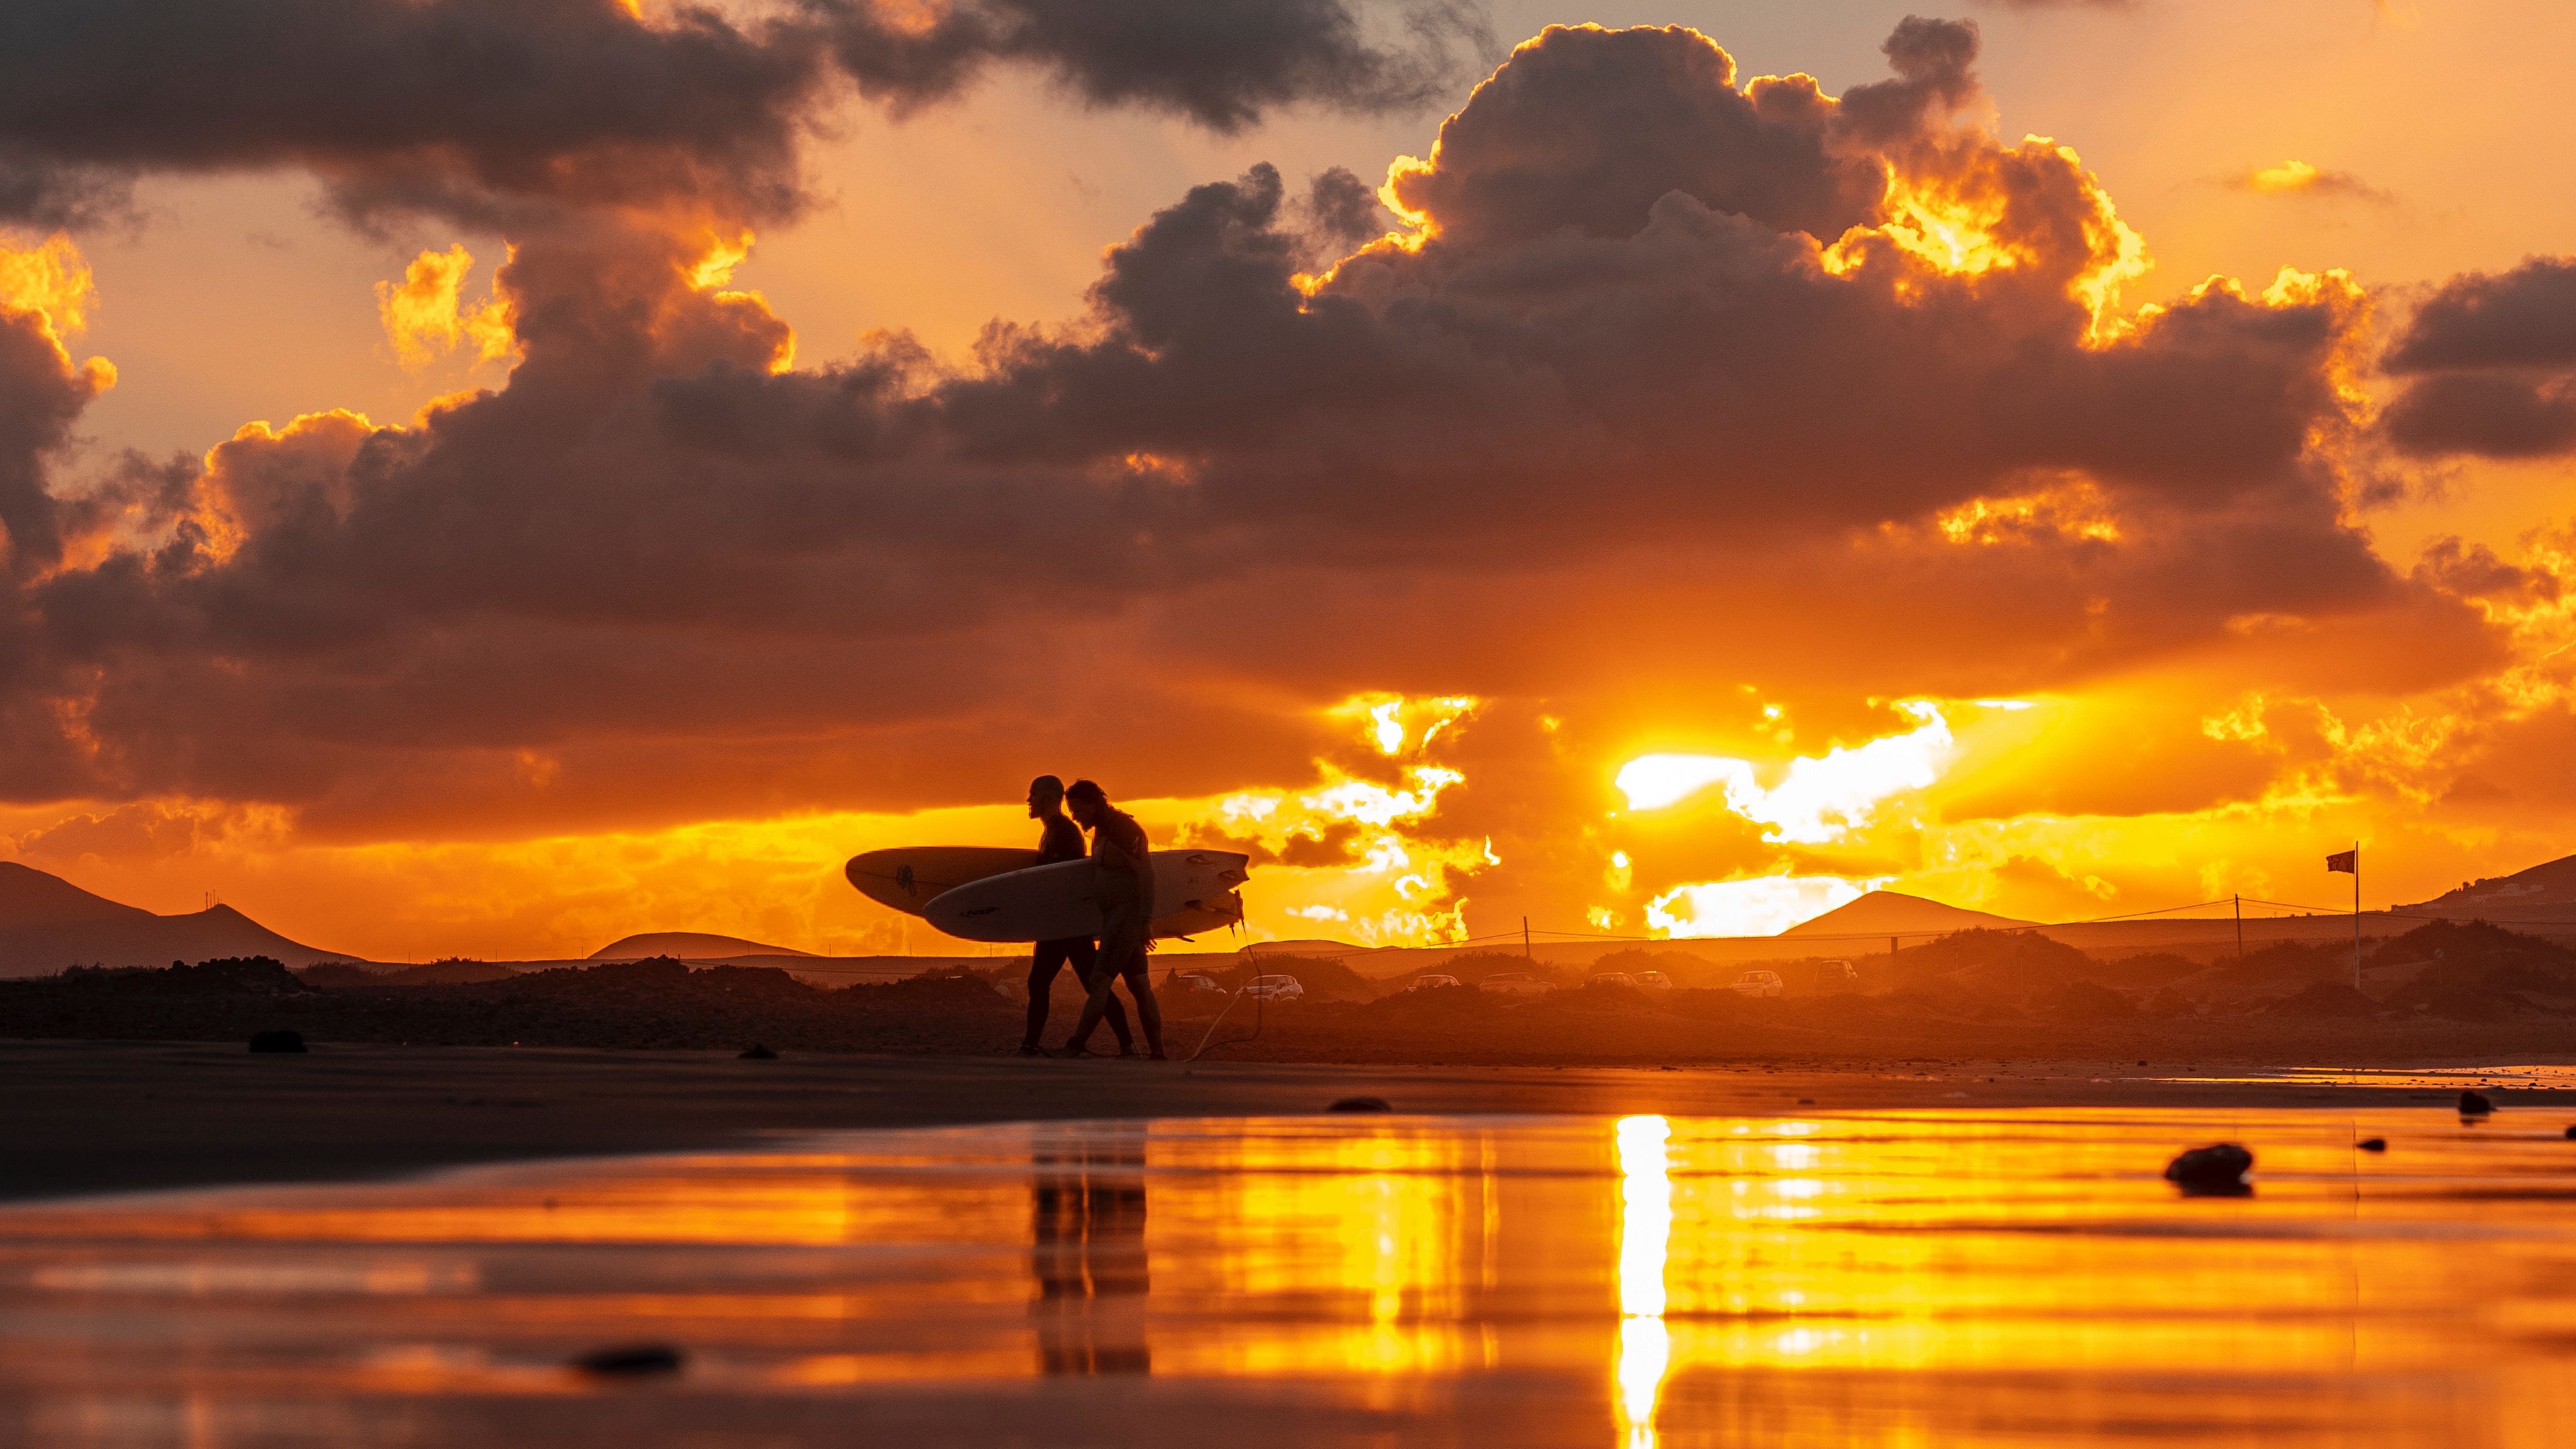 Sunset Surfing Wallpapers